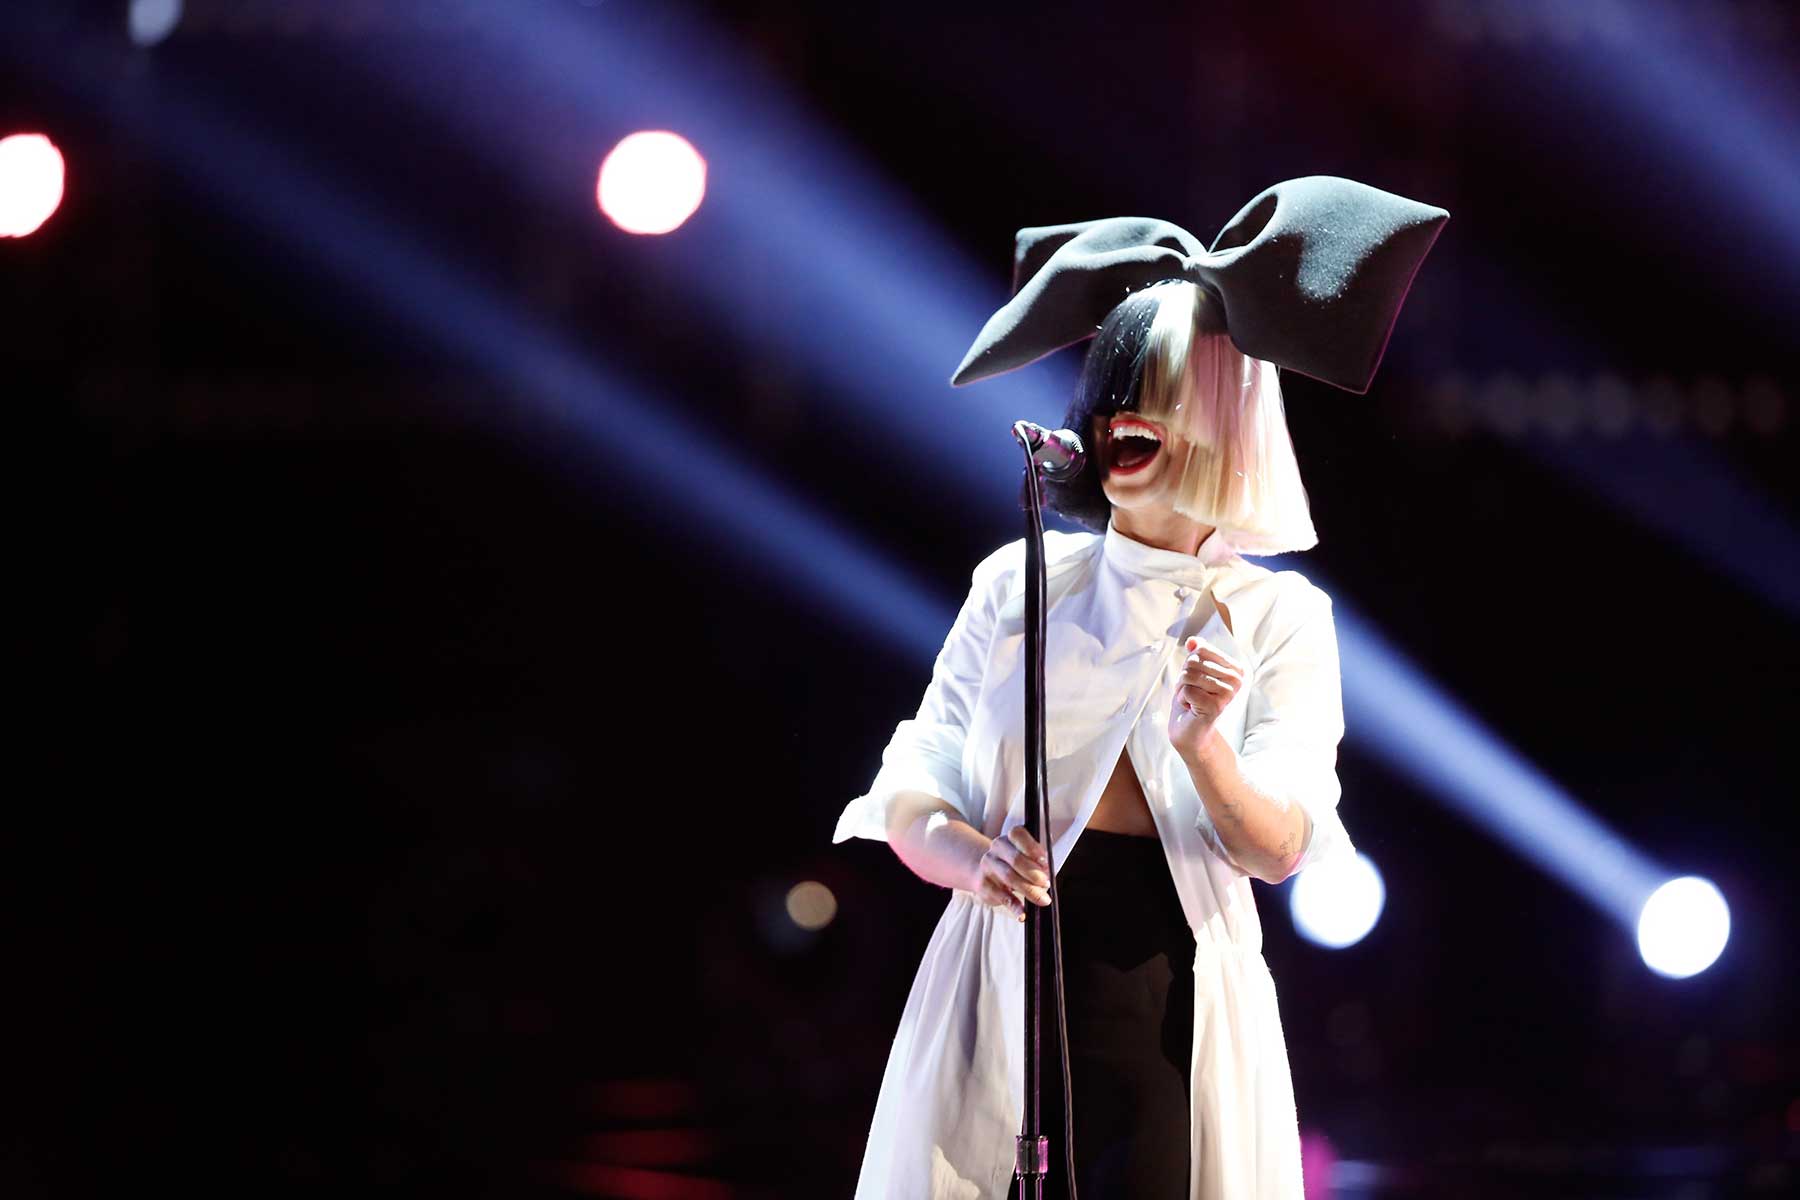 sia-singer-this-is-acting-musician